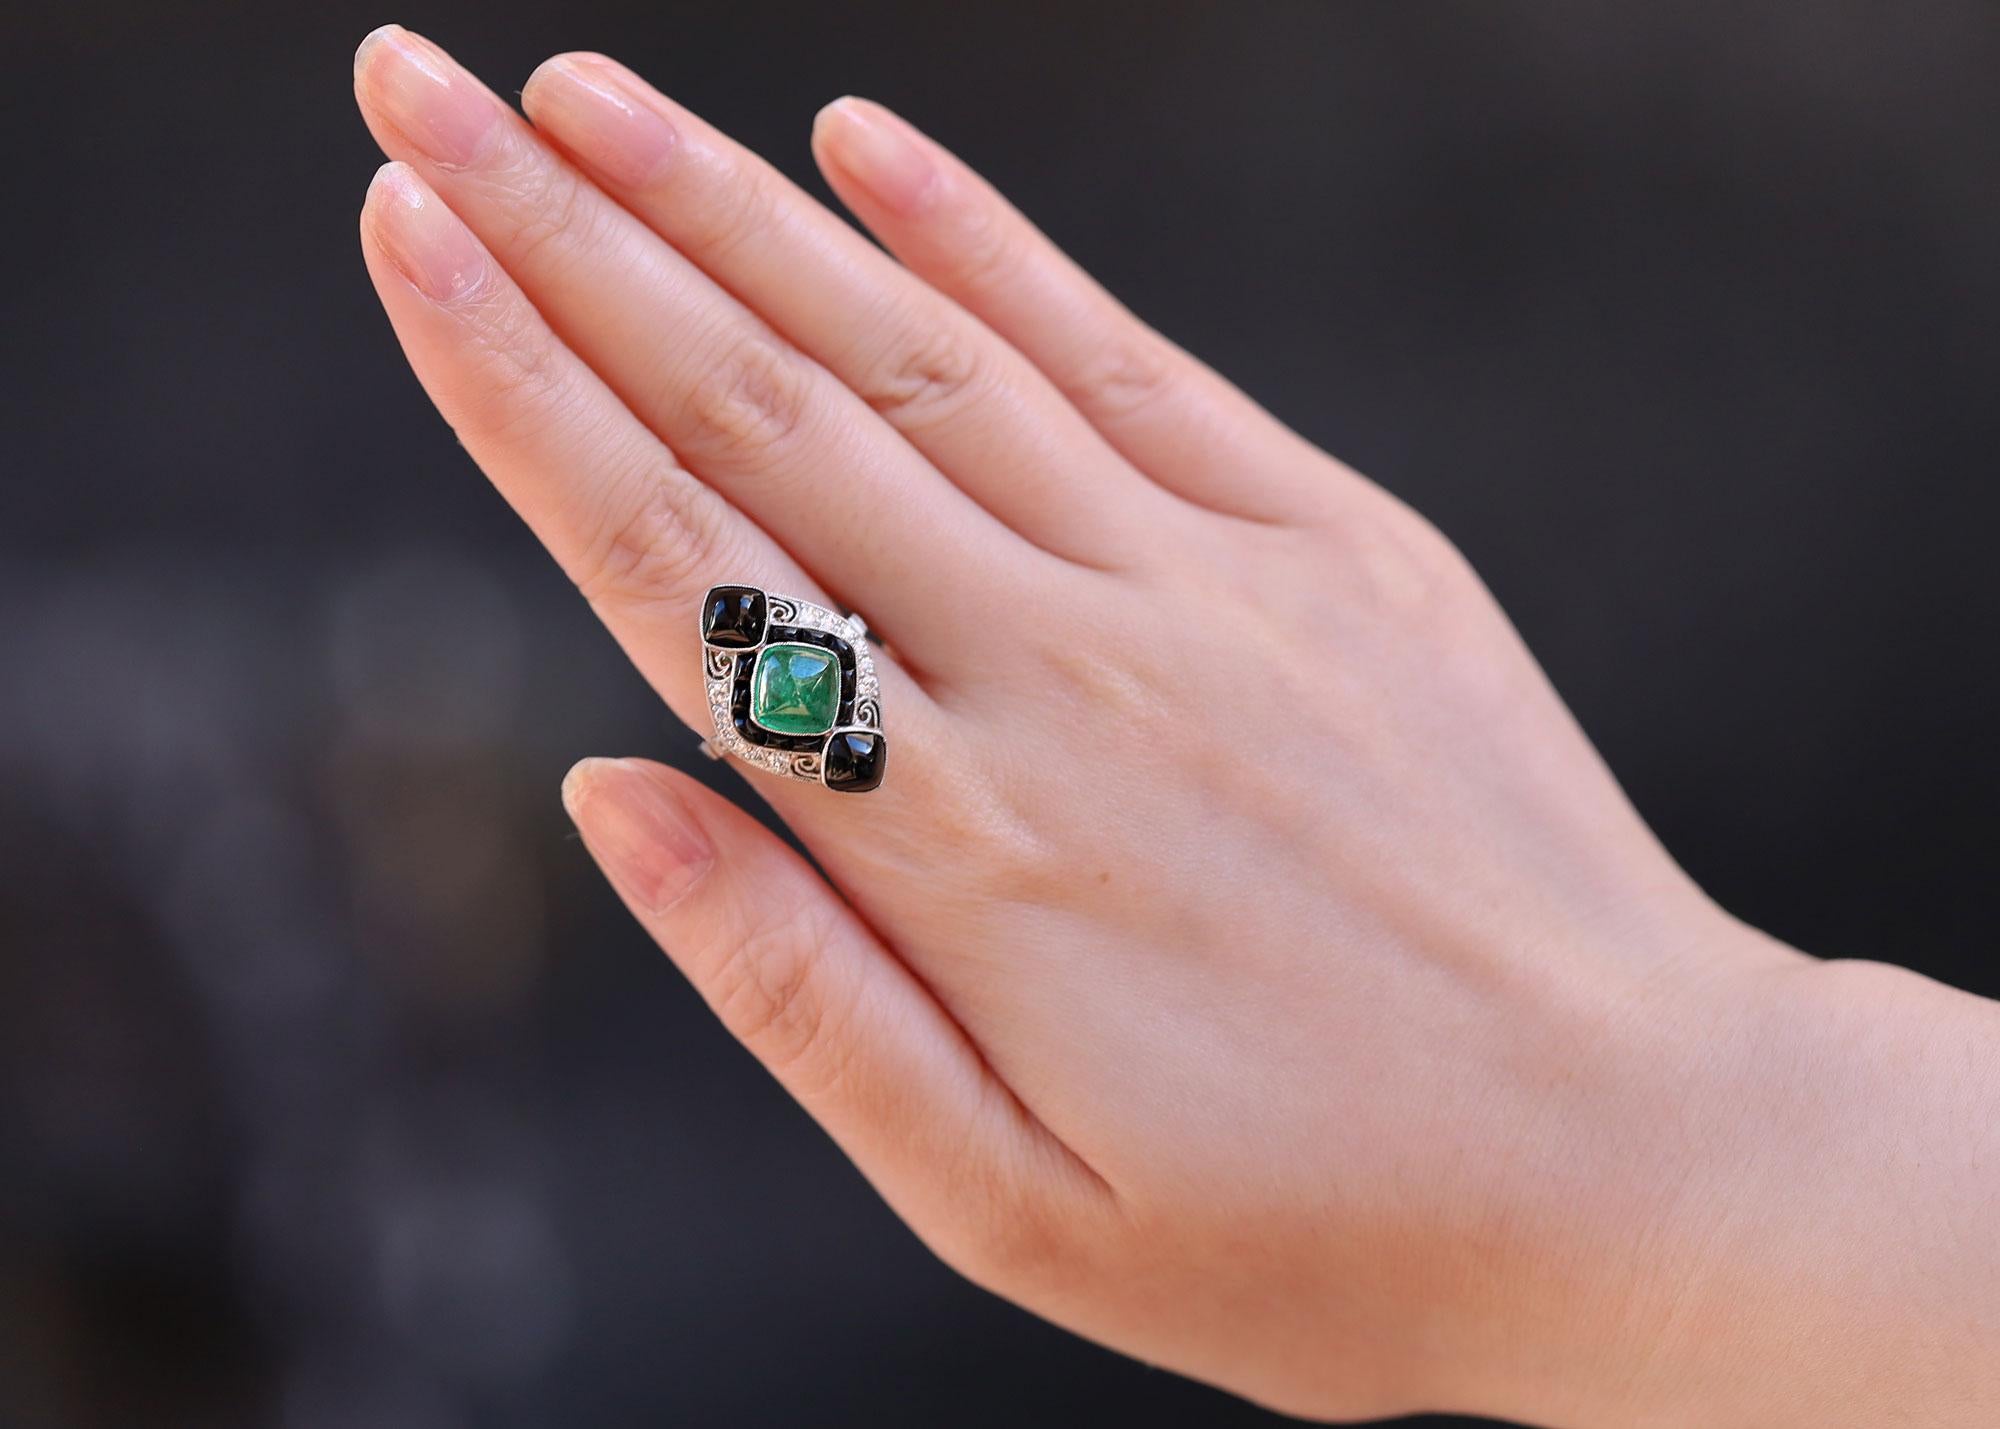 Centered by a lush, green cabochon Colombian emerald along with a bevy of sleek black onyx, this Art Deco inspired cocktail ring is a mesmerizing treasure. Hand crafted of platinum with fine milgrain details and a touch of filigree, a faithful